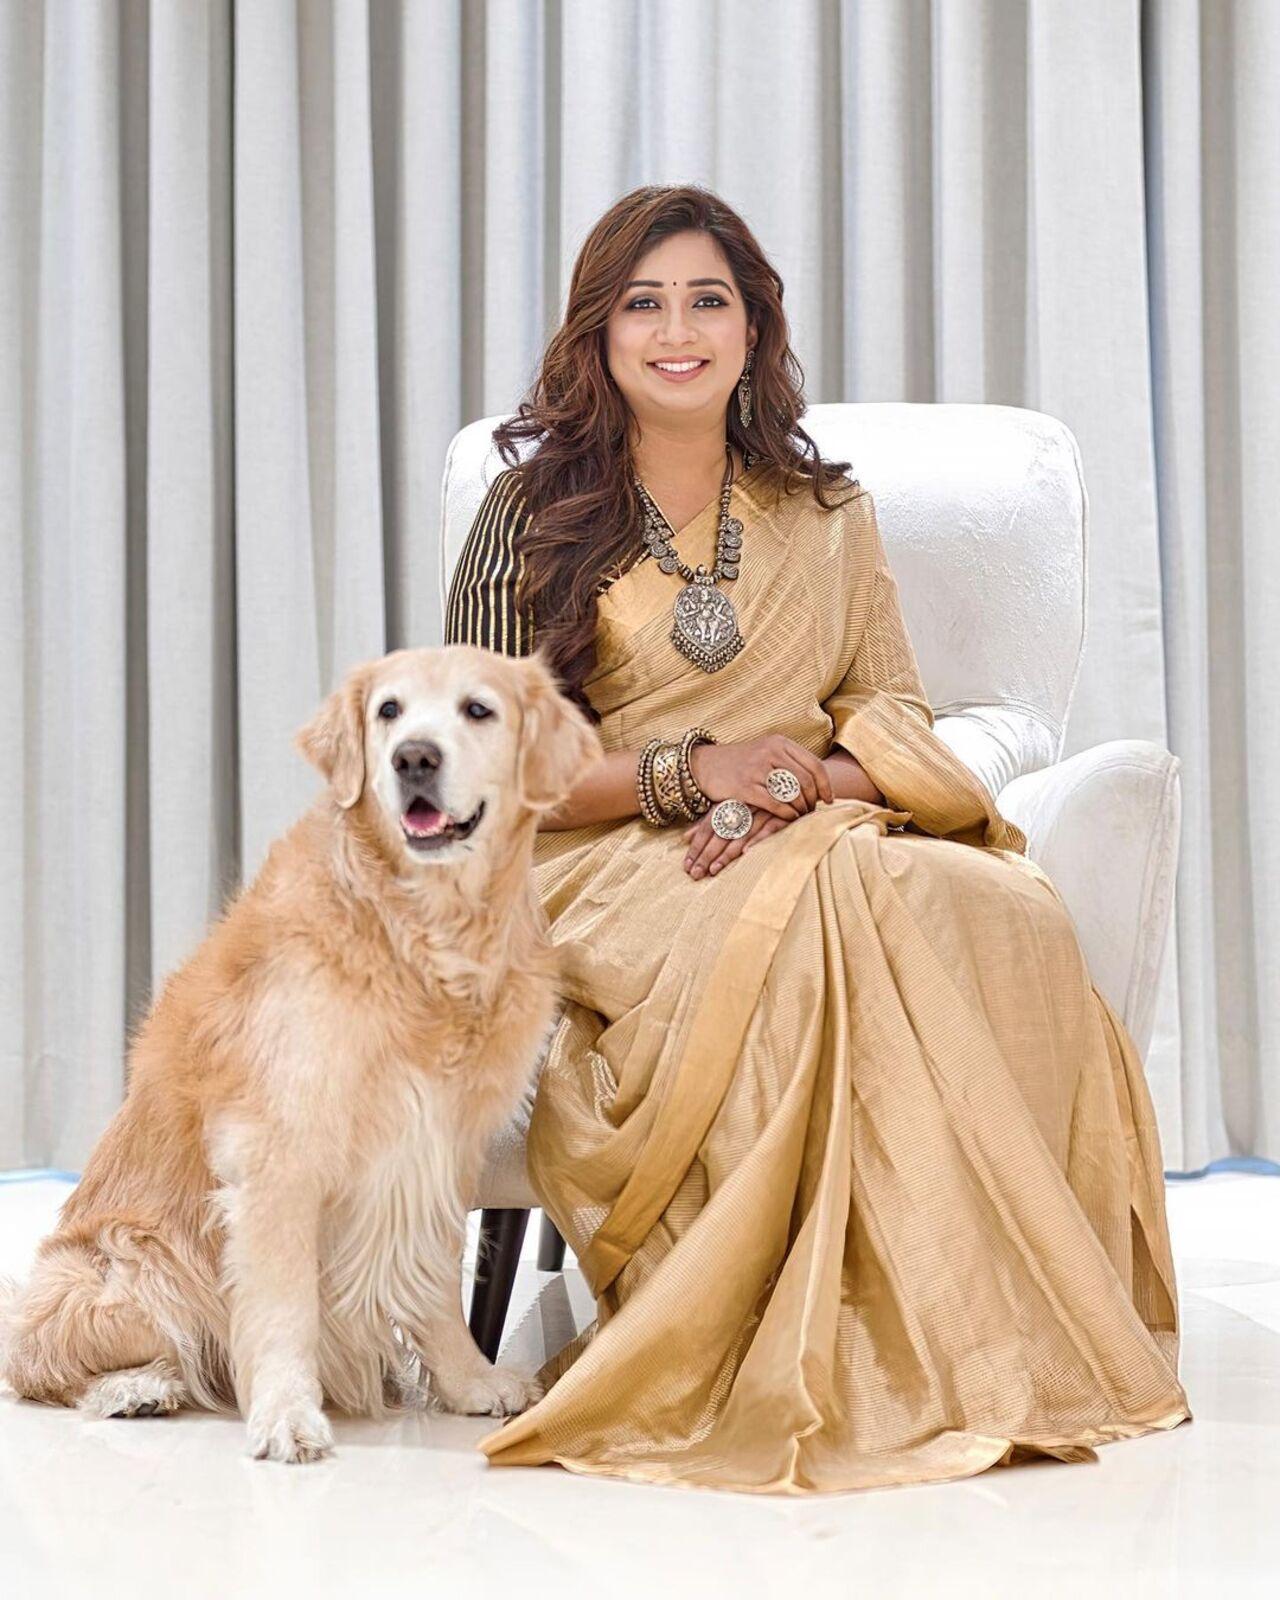 How adorable is this frame of Shreya with her doggo?